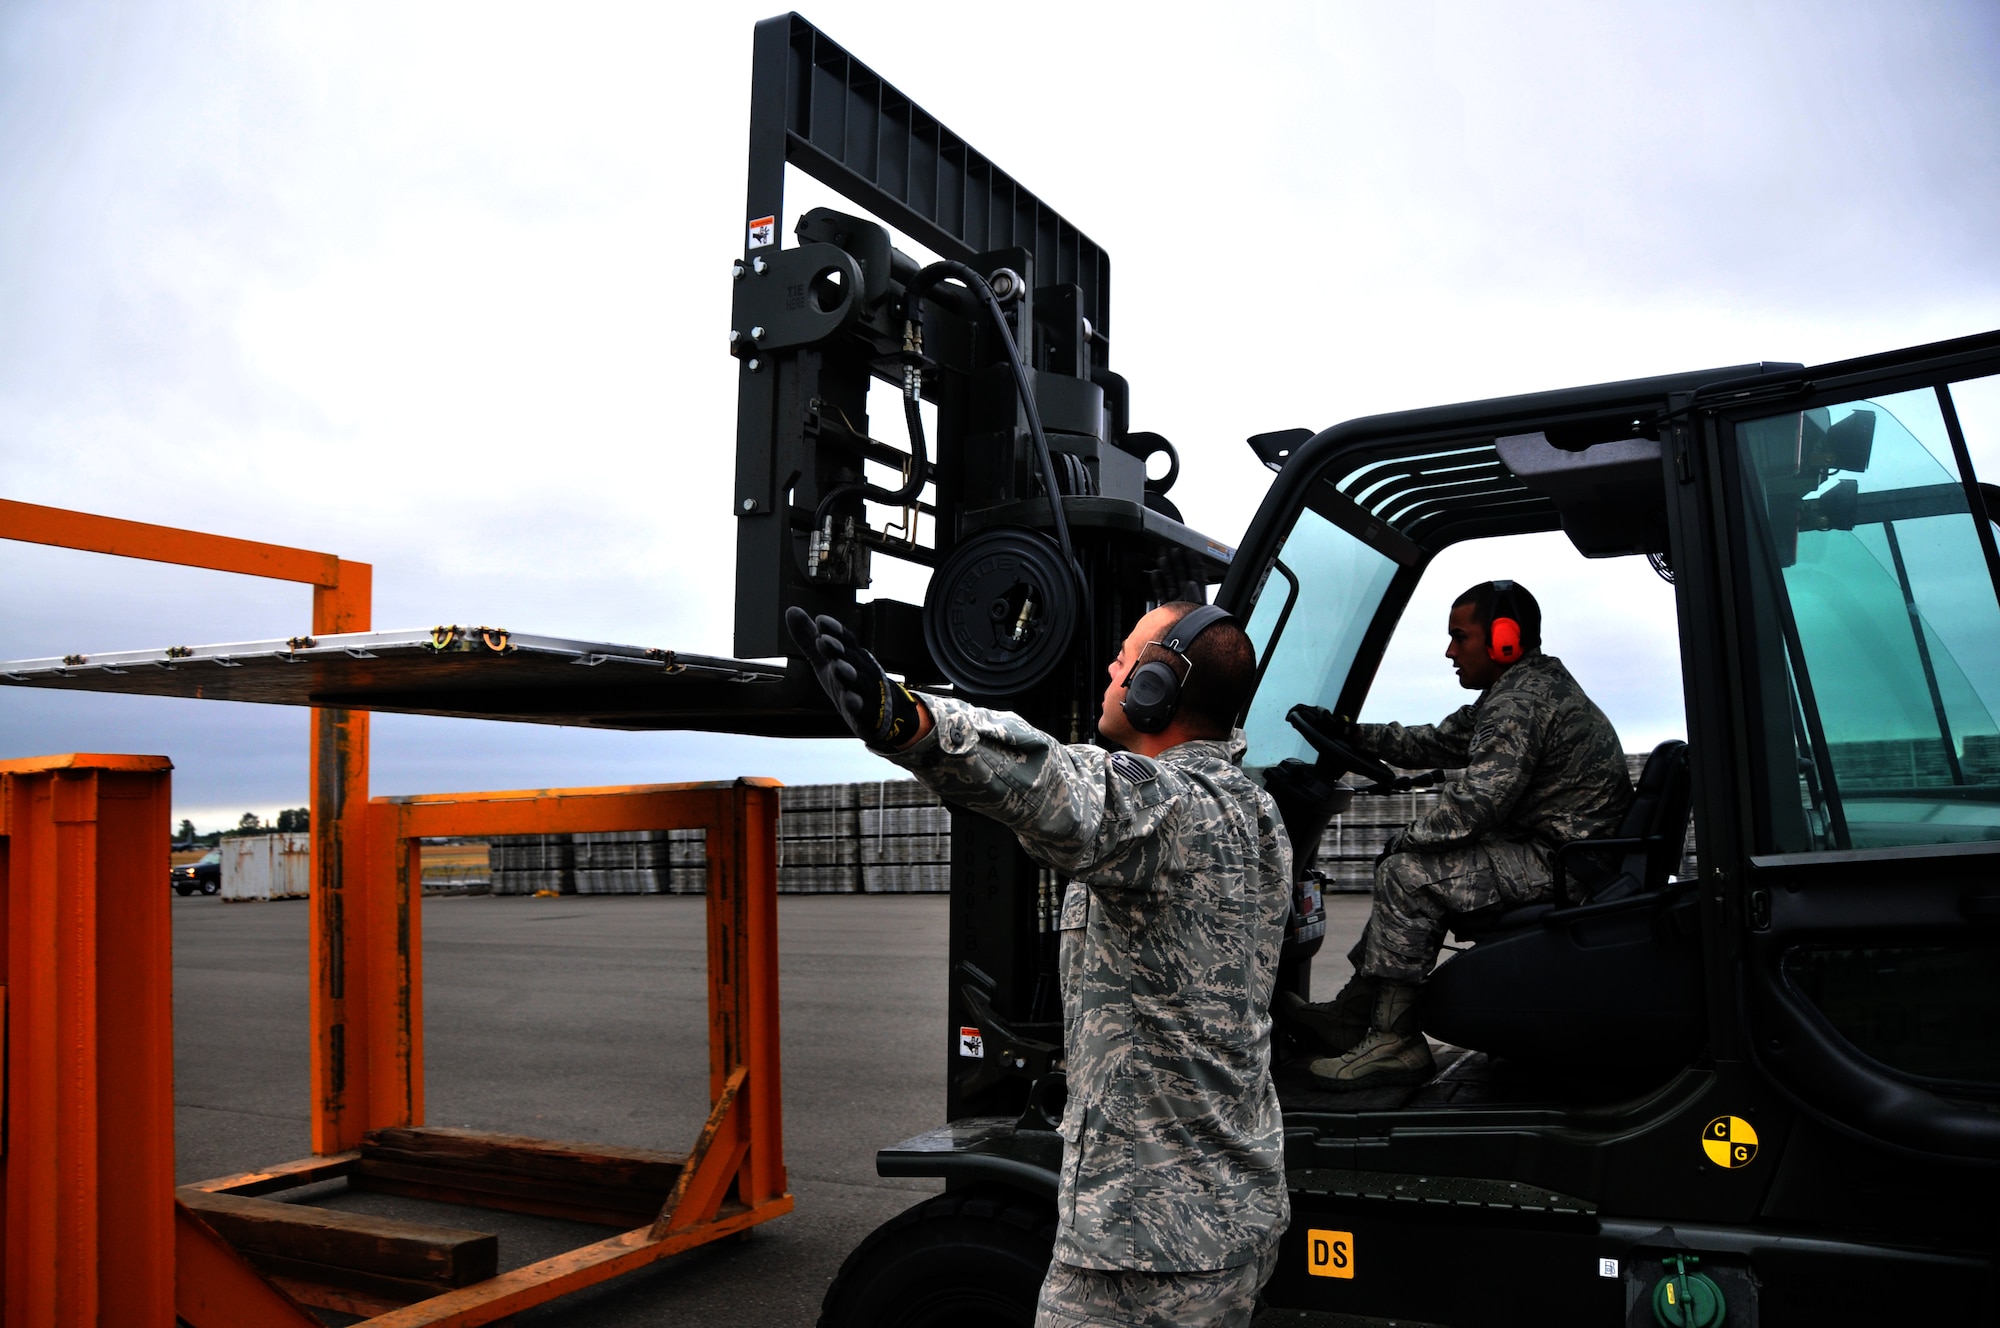 Two Airmen unload a pallet into a pallet stacker during a forklift driving course, July 25, 2011, at Joint Base Lewis-McChord, Wash. The event was part of Air Mobility Rodeo 2011, a biennial international competition that focuses on mission readiness, featuring airdrops, aerial refueling and other events that showcase the skills of mobility crews from around the world. (U.S. Air Force photo/ Airman 1st Class Jared Trimarchi) 

